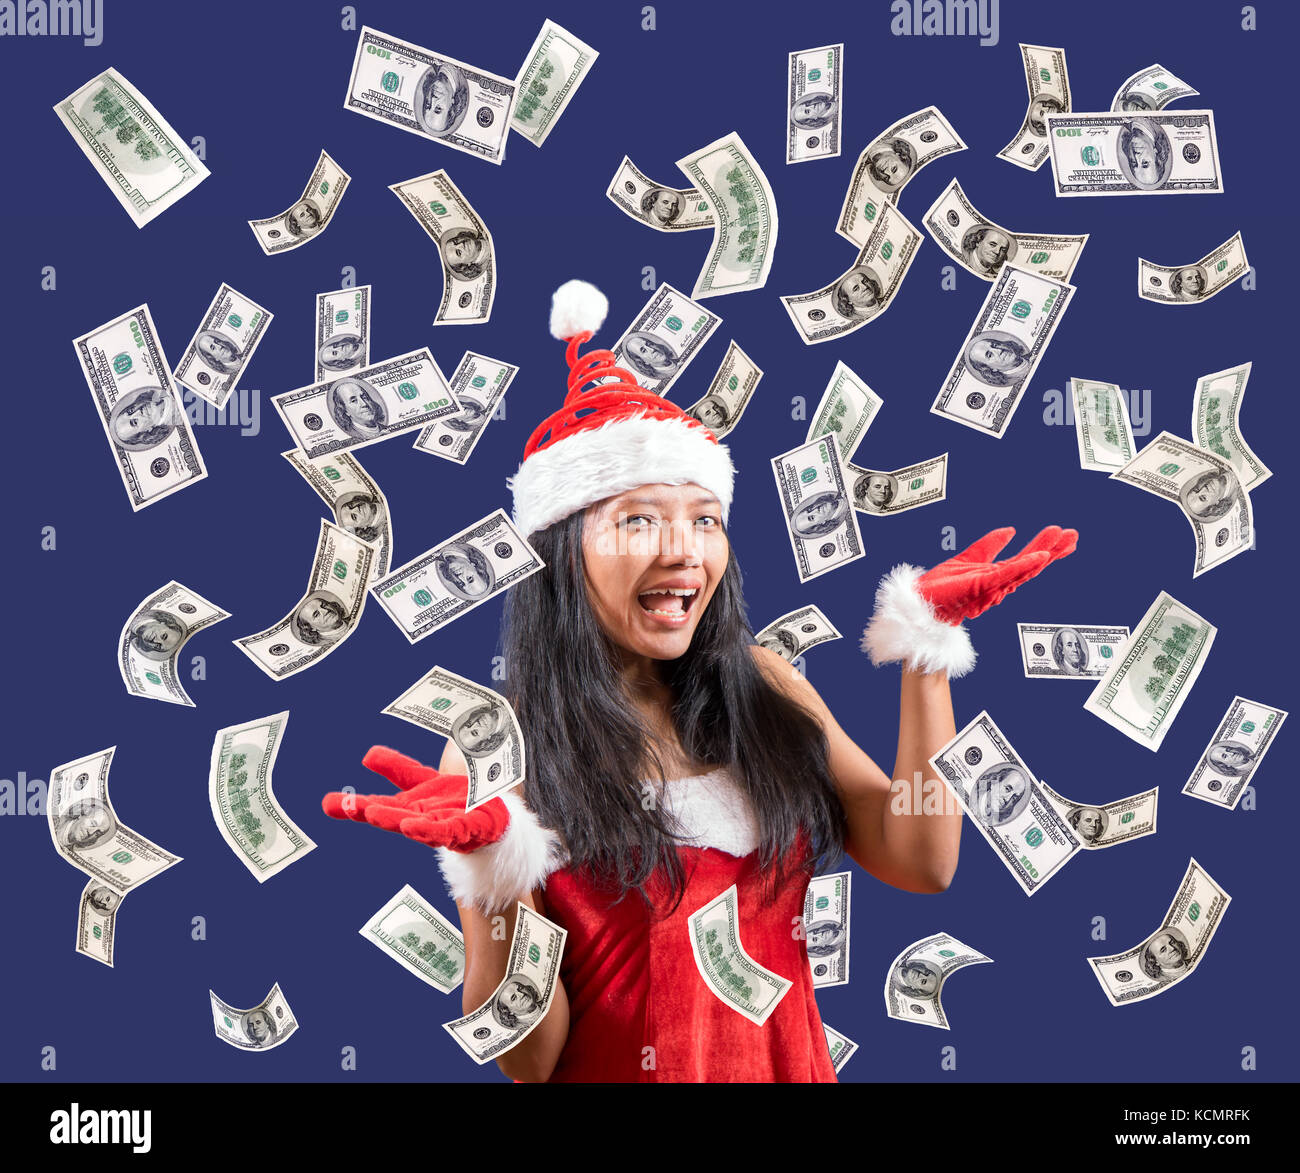 Cheerful Mrs. Claus looks at the camera with her hands showing flying money. Dollar bills are falling around Mrs. Santa Claus. Stock Photo